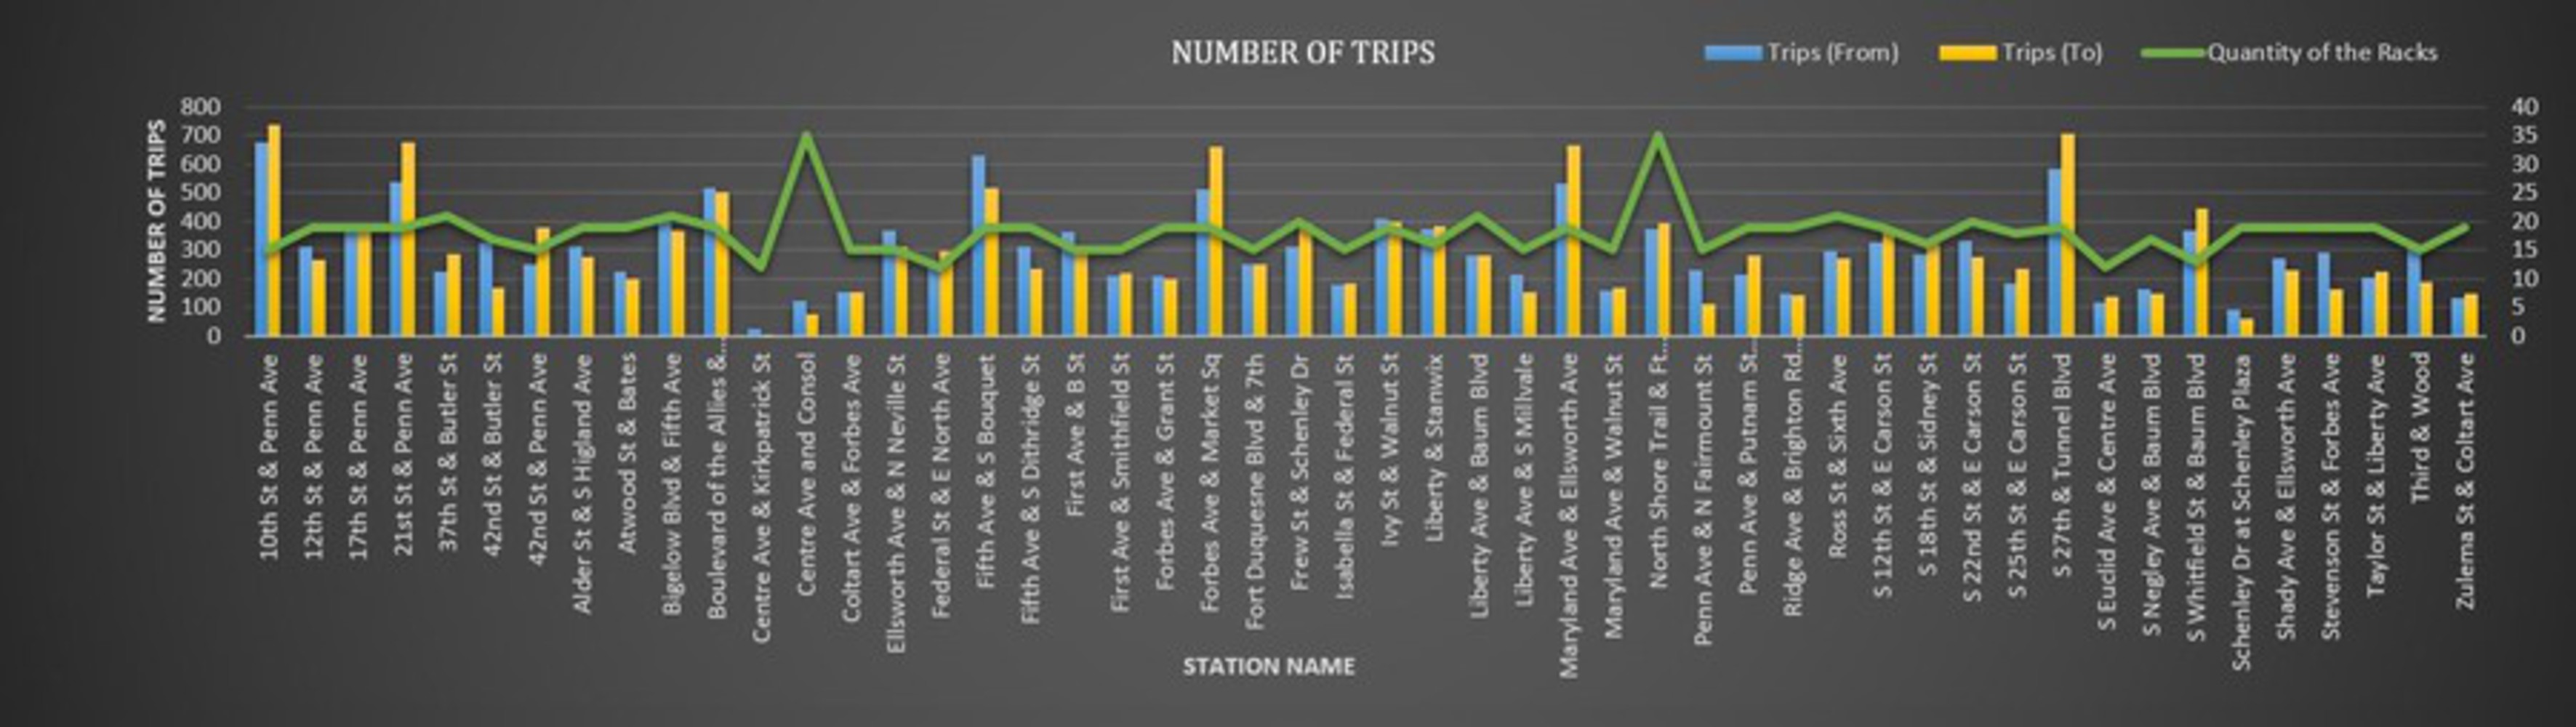 Number of trips.jpg.thumb